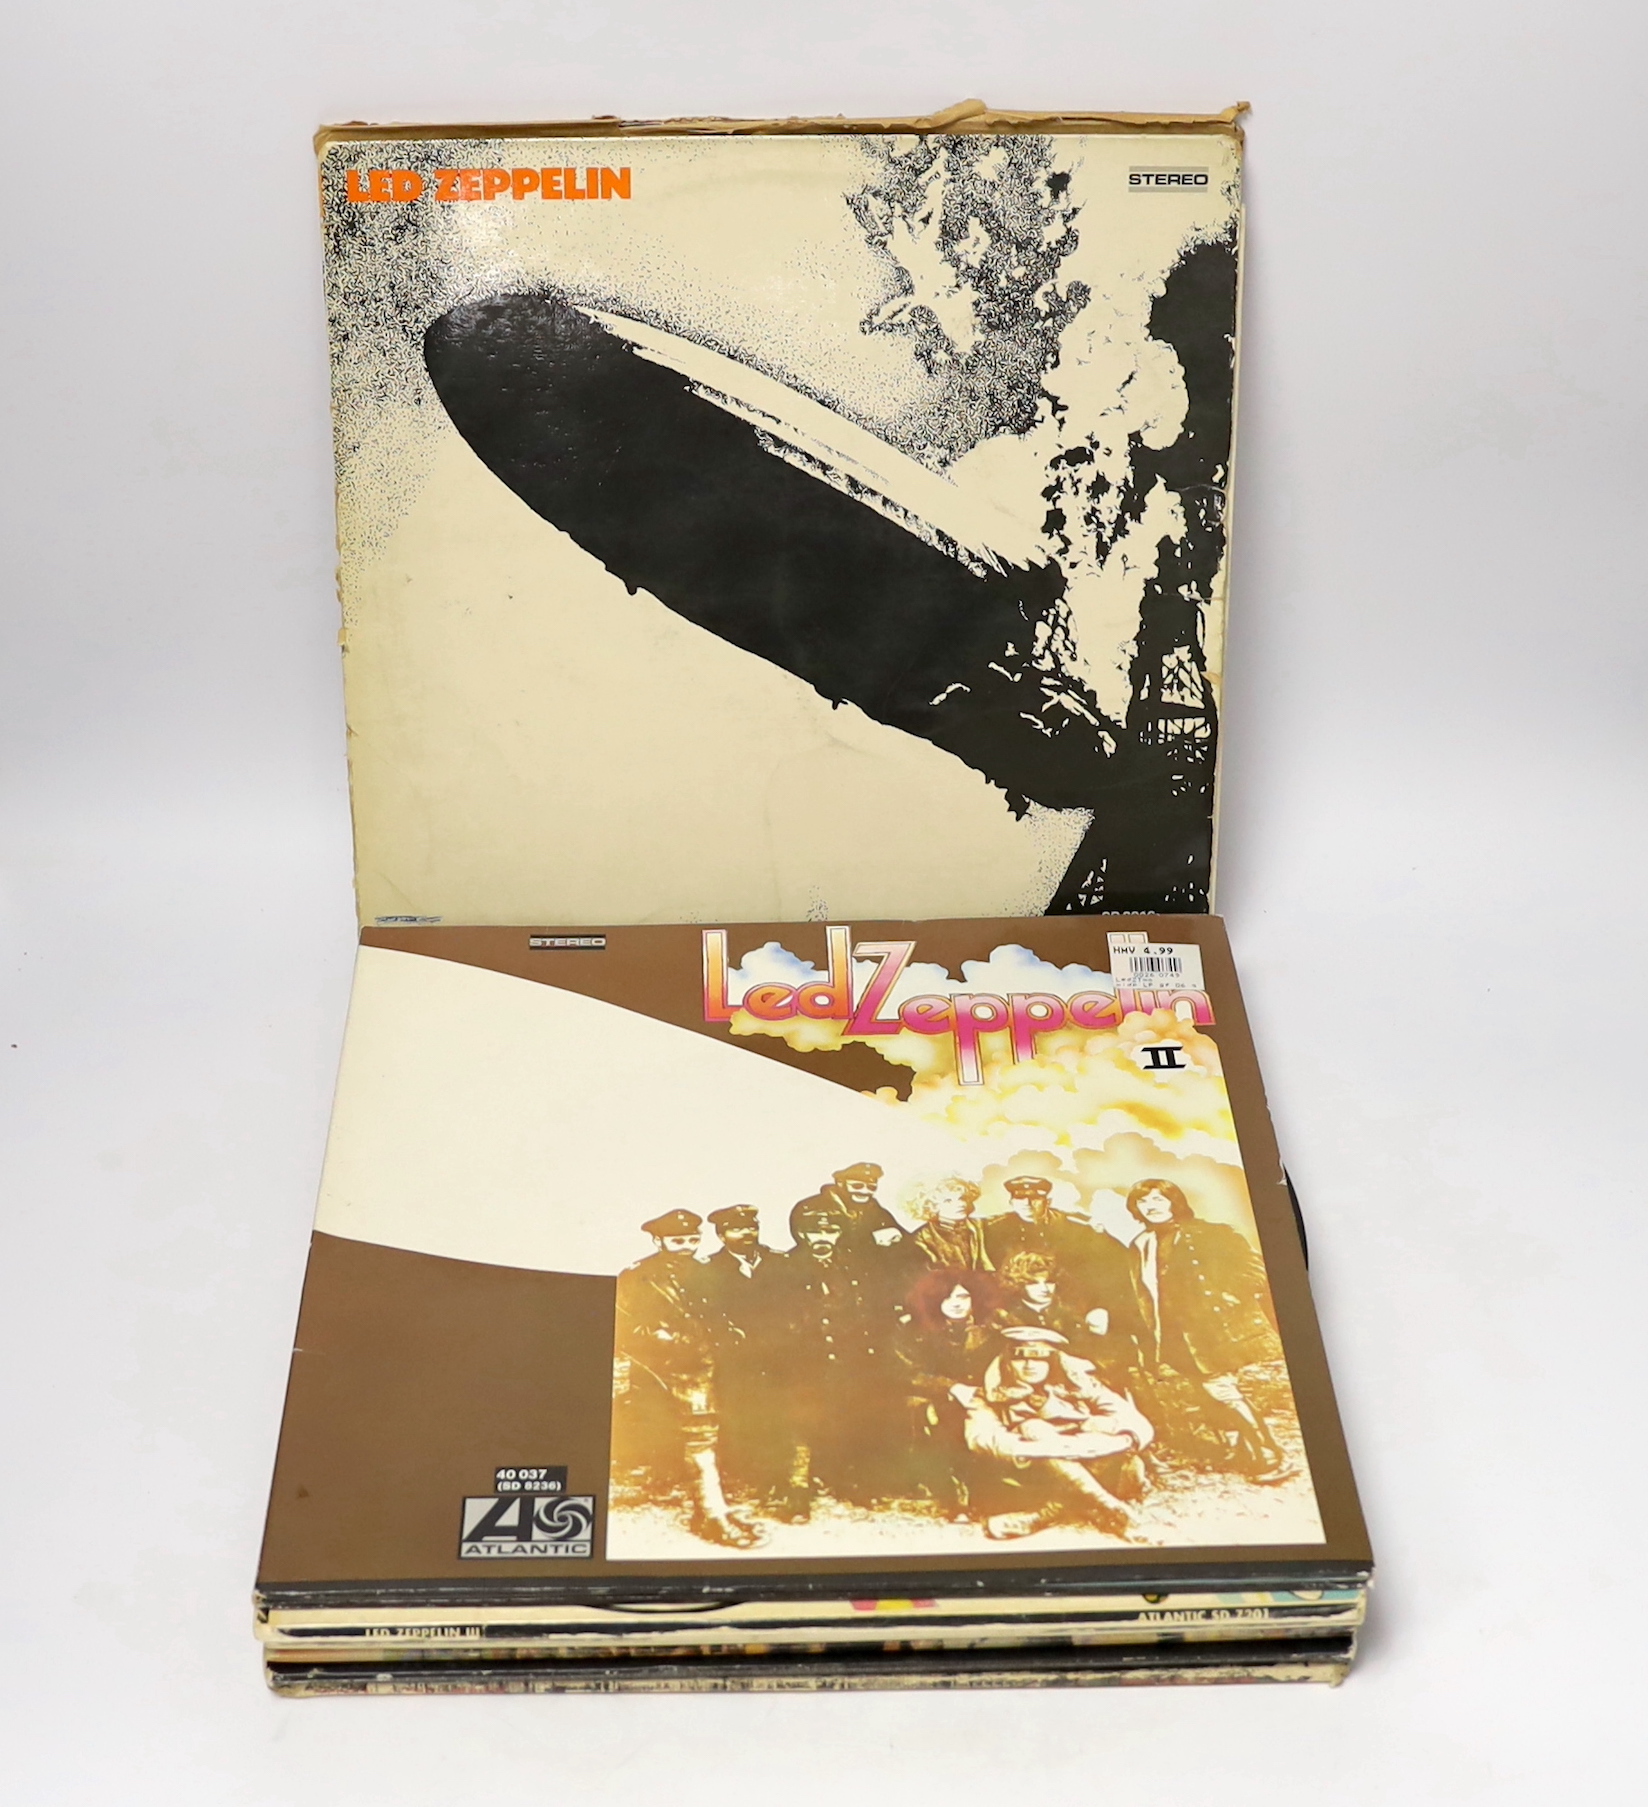 Nine Led Zeppelin LP albums, including; In Through the Out Door, in original brown paper bag, Led Zeppelin, Led Zeppelin II, Led Zeppelin III, Led Zeppelin IV, Presence, Houses of the Holy, The Song Remains the Same, and